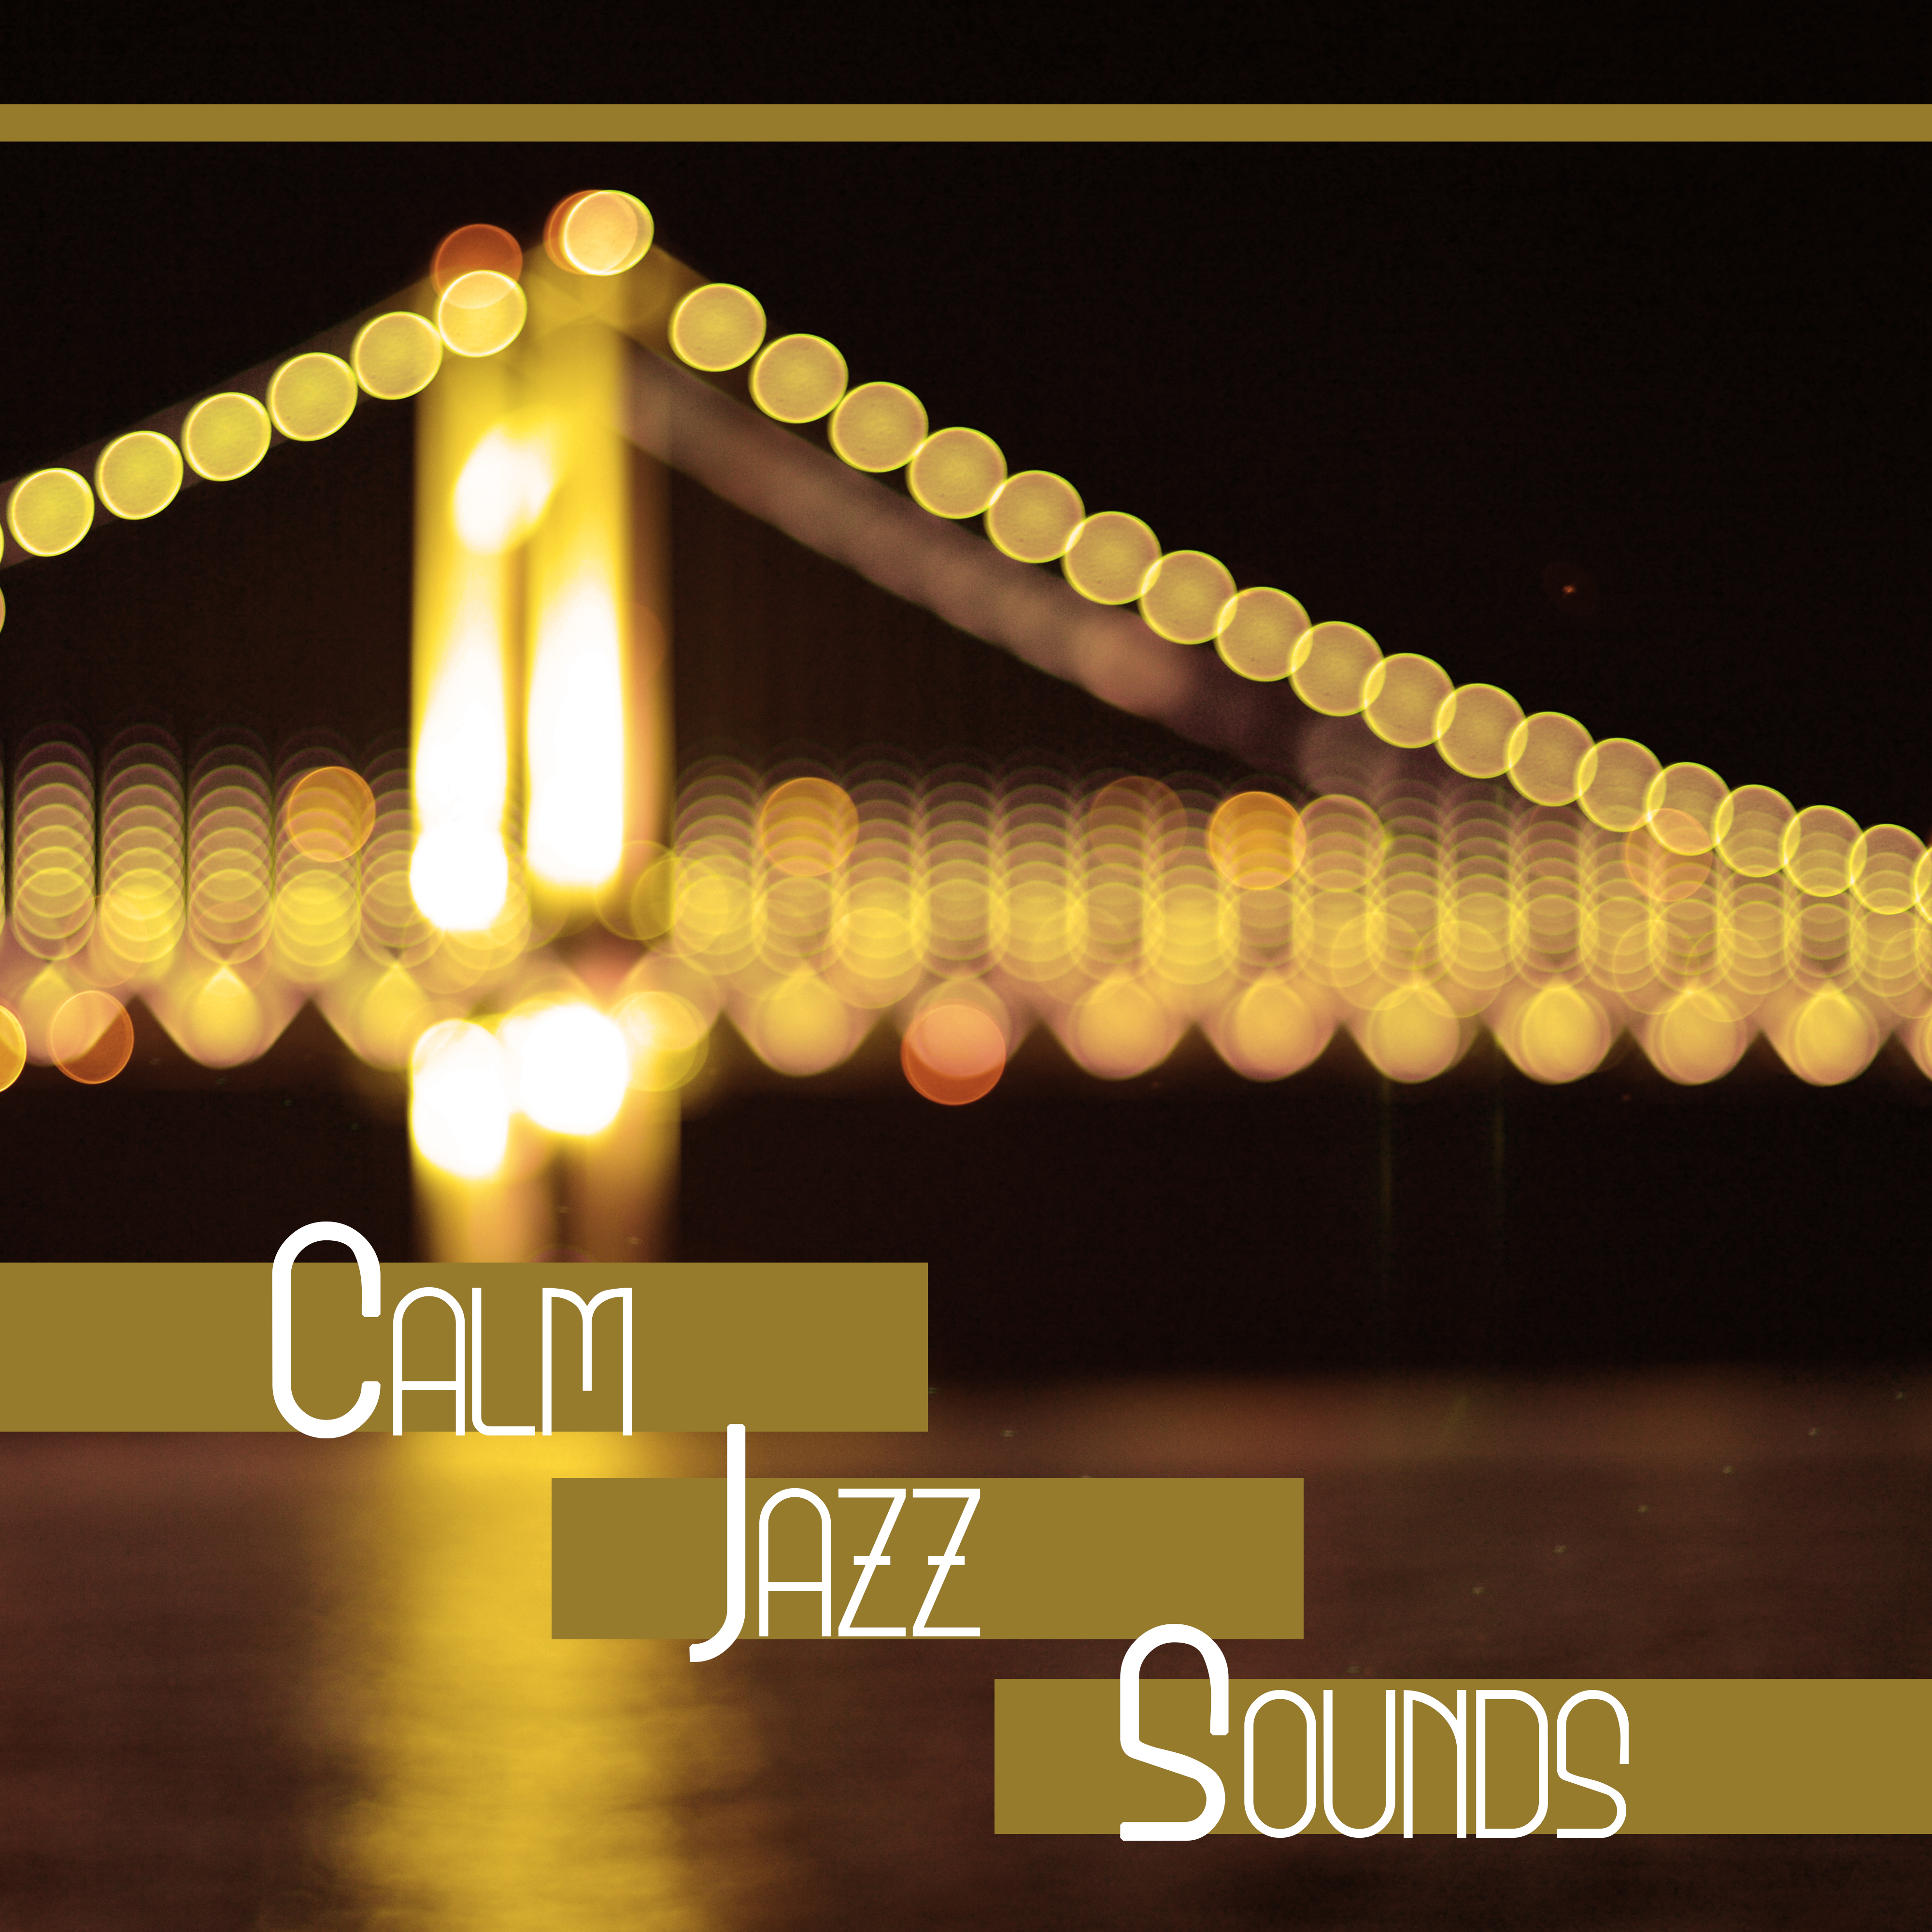 Calm Jazz Sounds  Rest with Jazz, Relaxing Music, Shades of Jazz, Moonlight Piano Bar